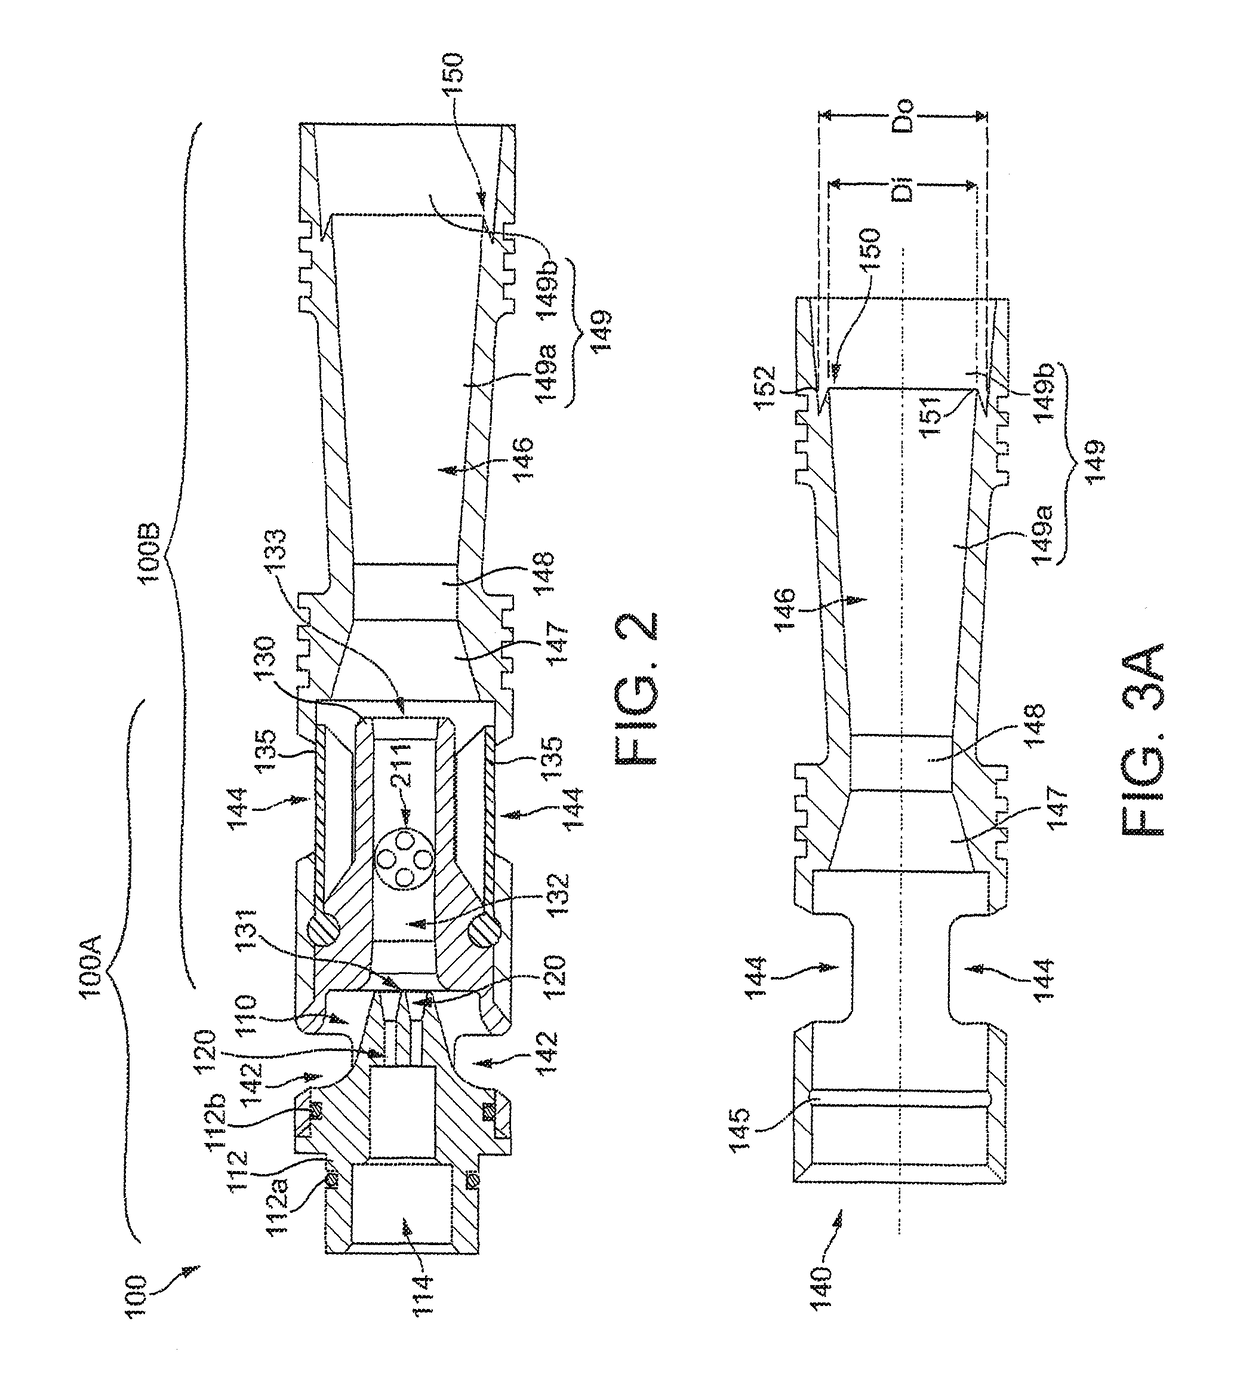 Vacuum ejector with multi-nozzle drive stage and booster